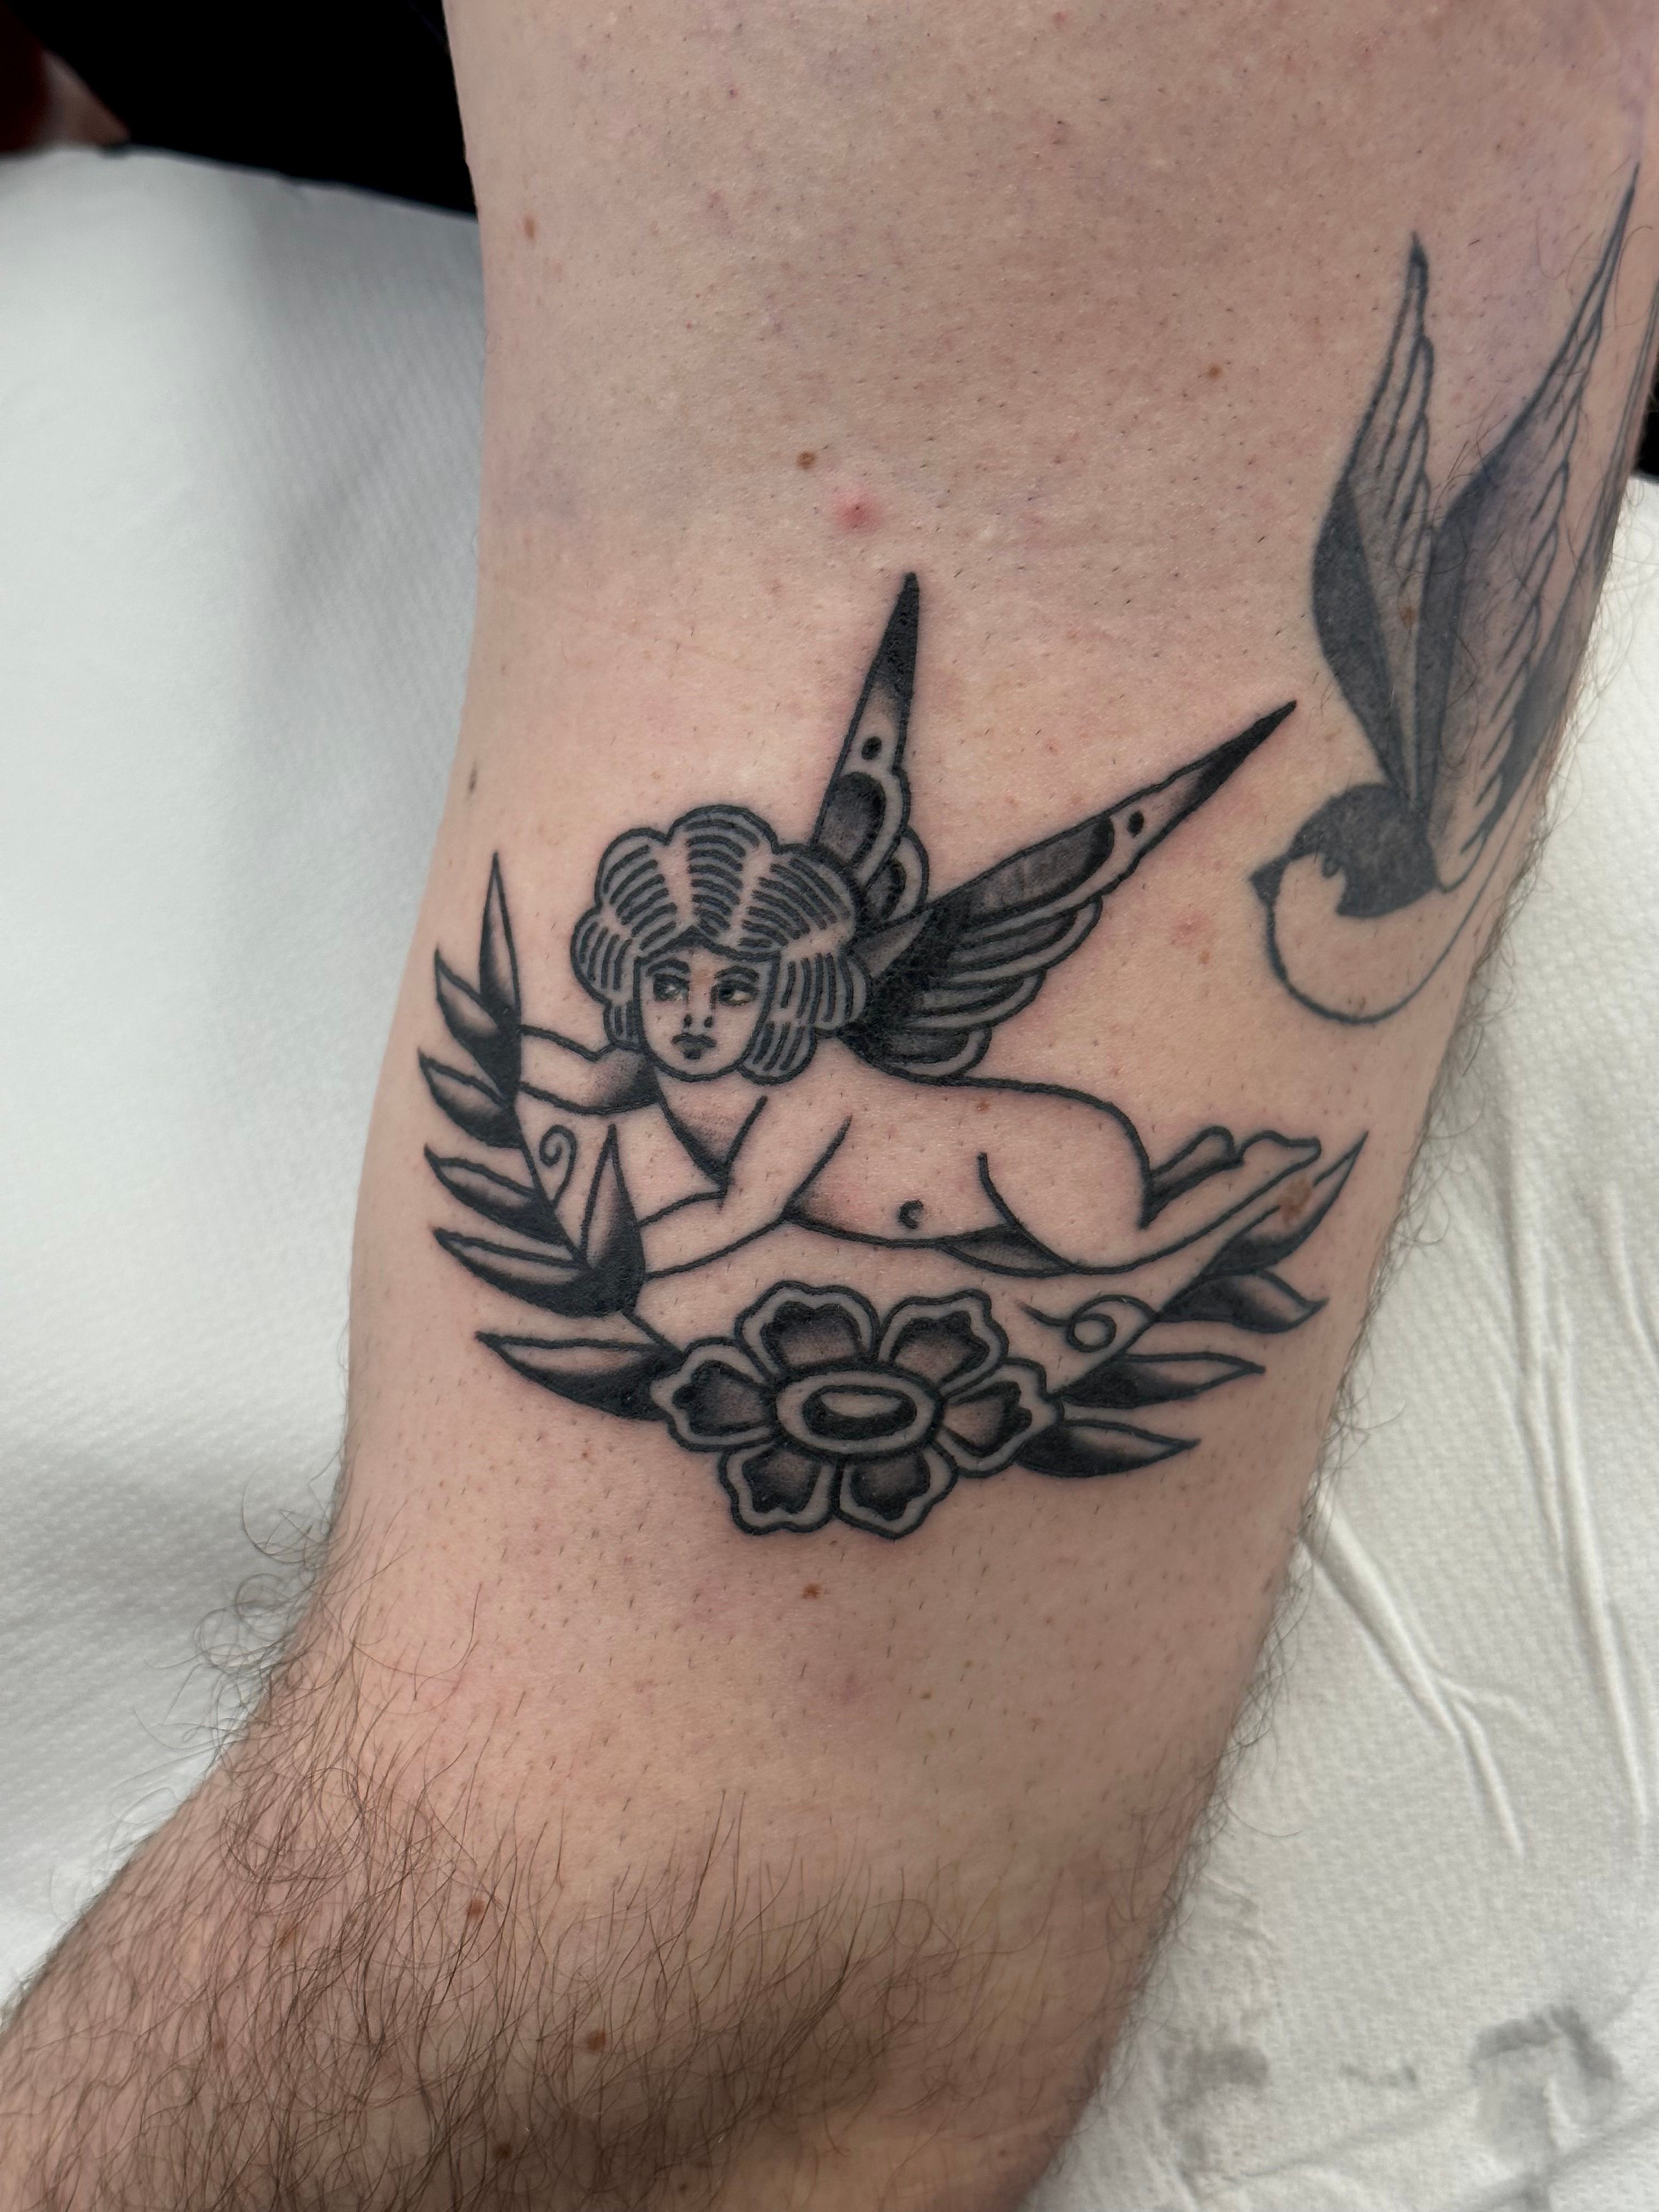 Fine line style cherub tattoo placed on the inner arm.